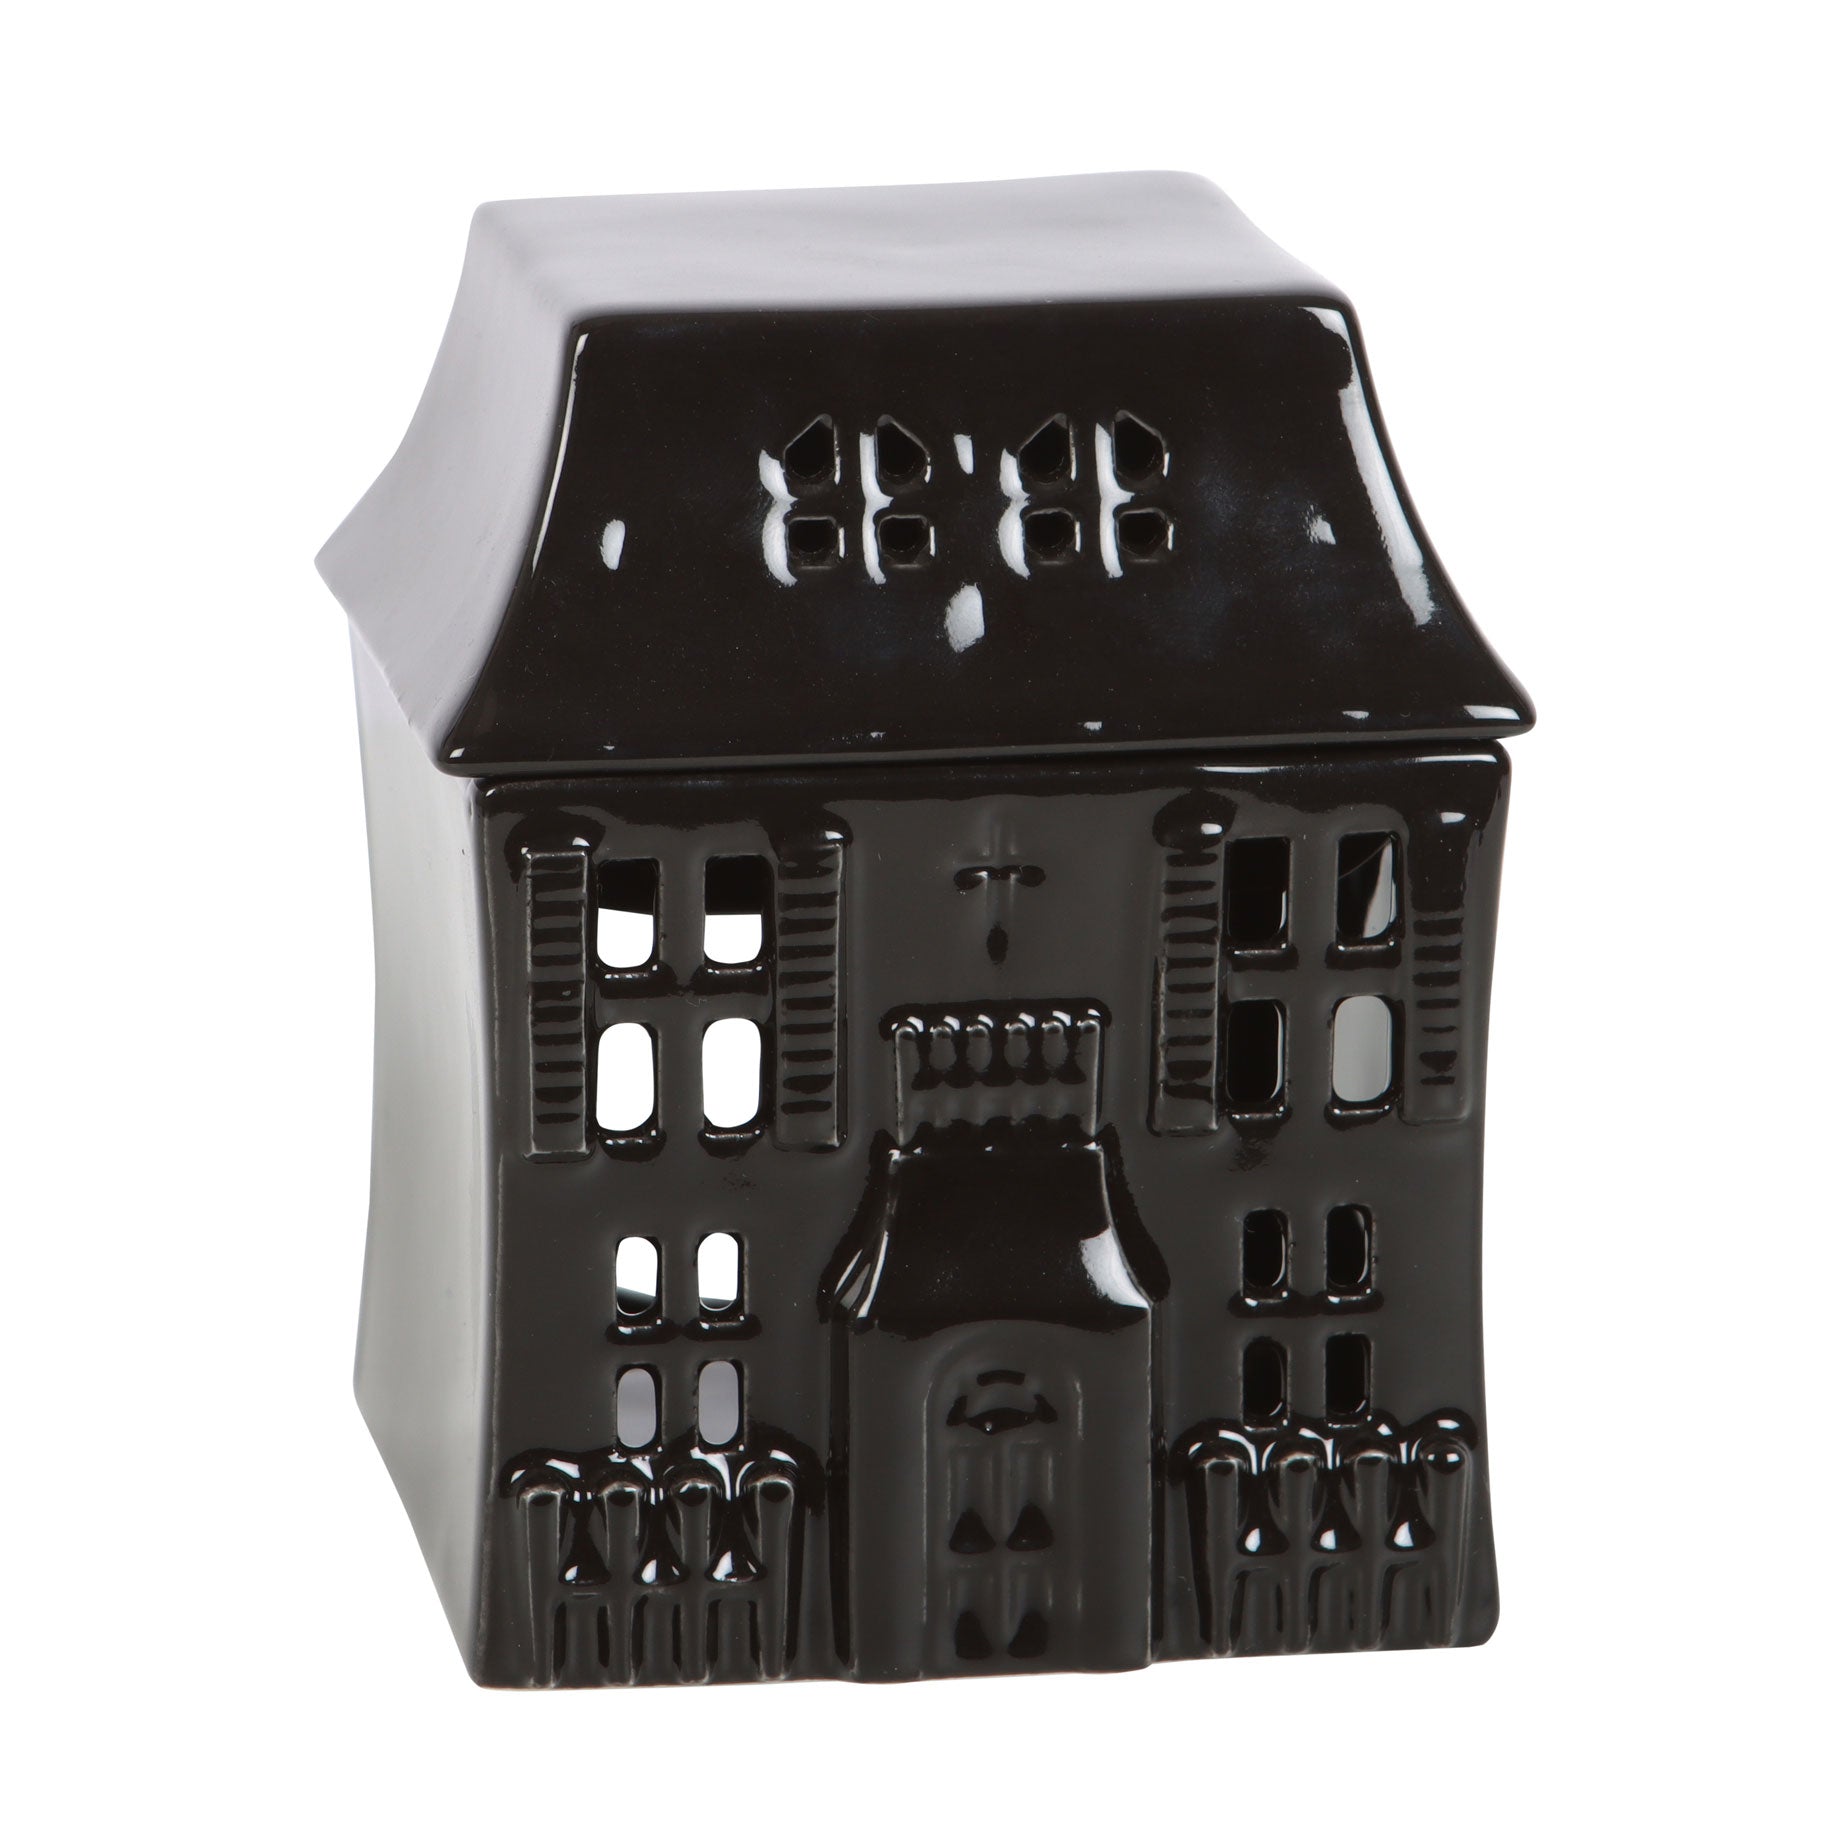 View Haunted House Oil Burner information